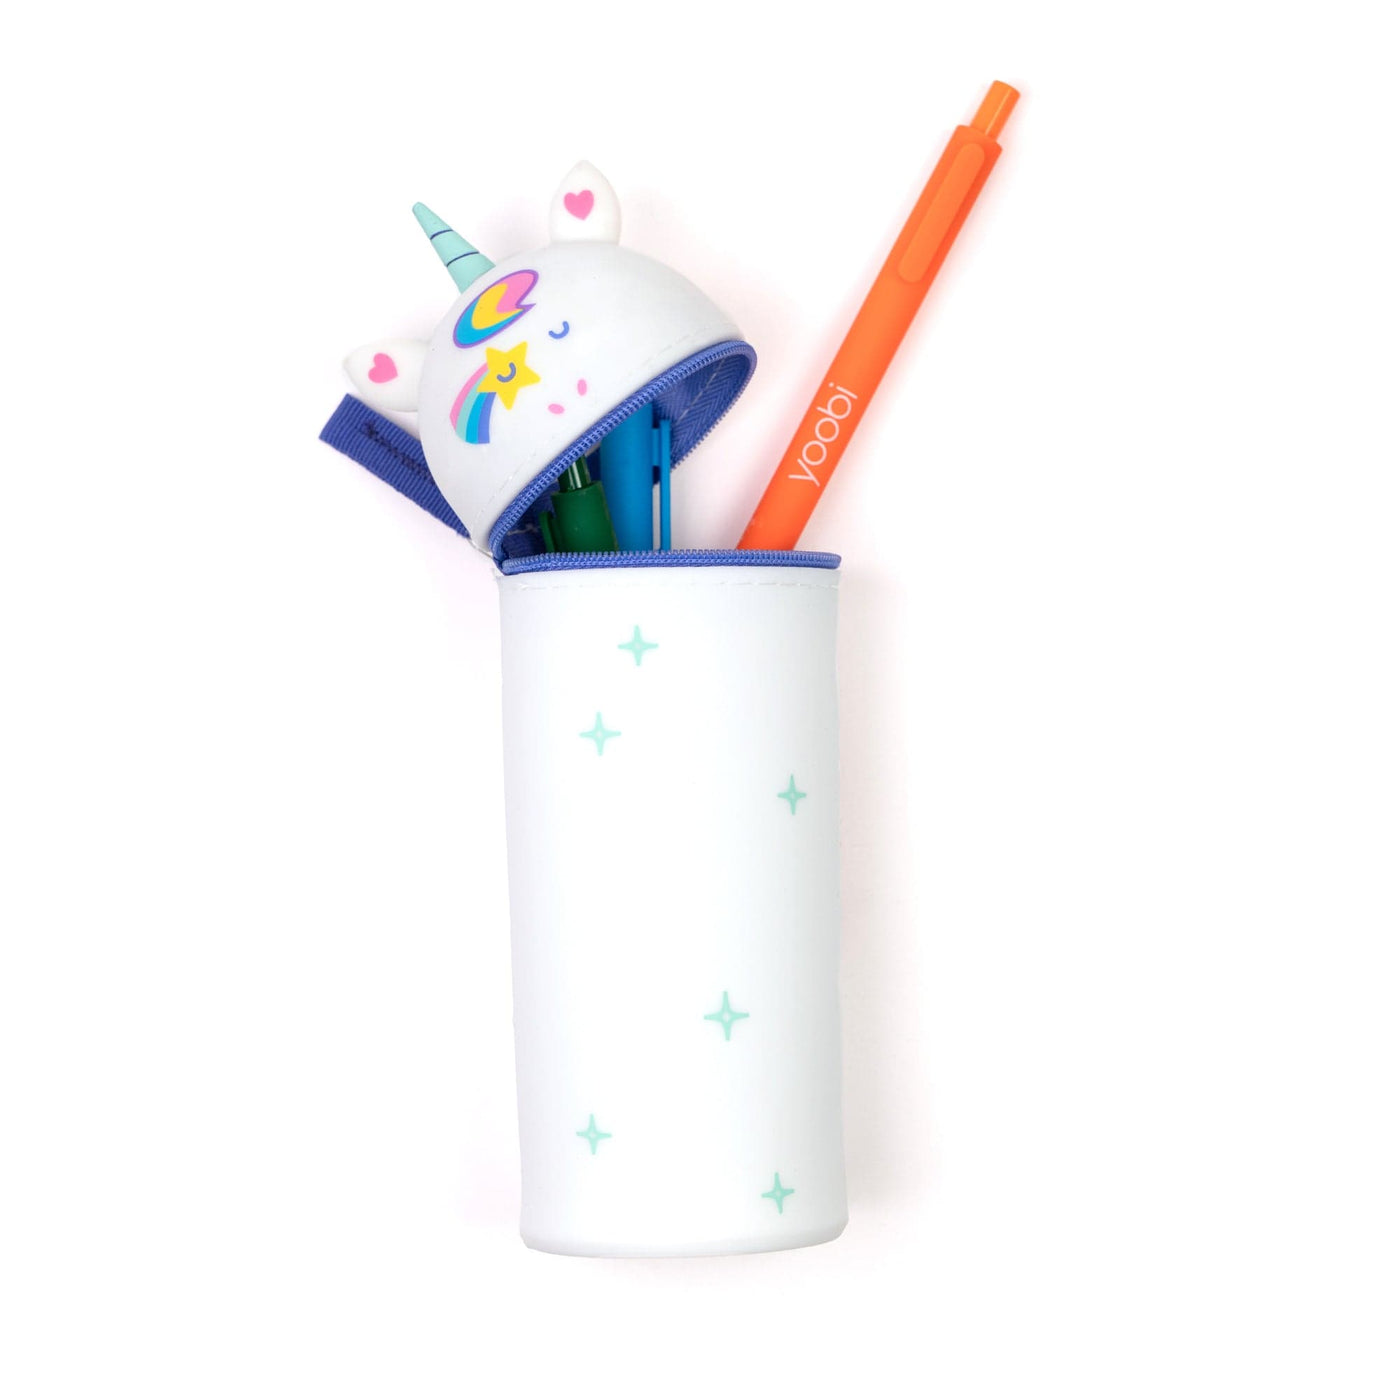 Standing unicorn pencil case with top unzipped showing pens inside